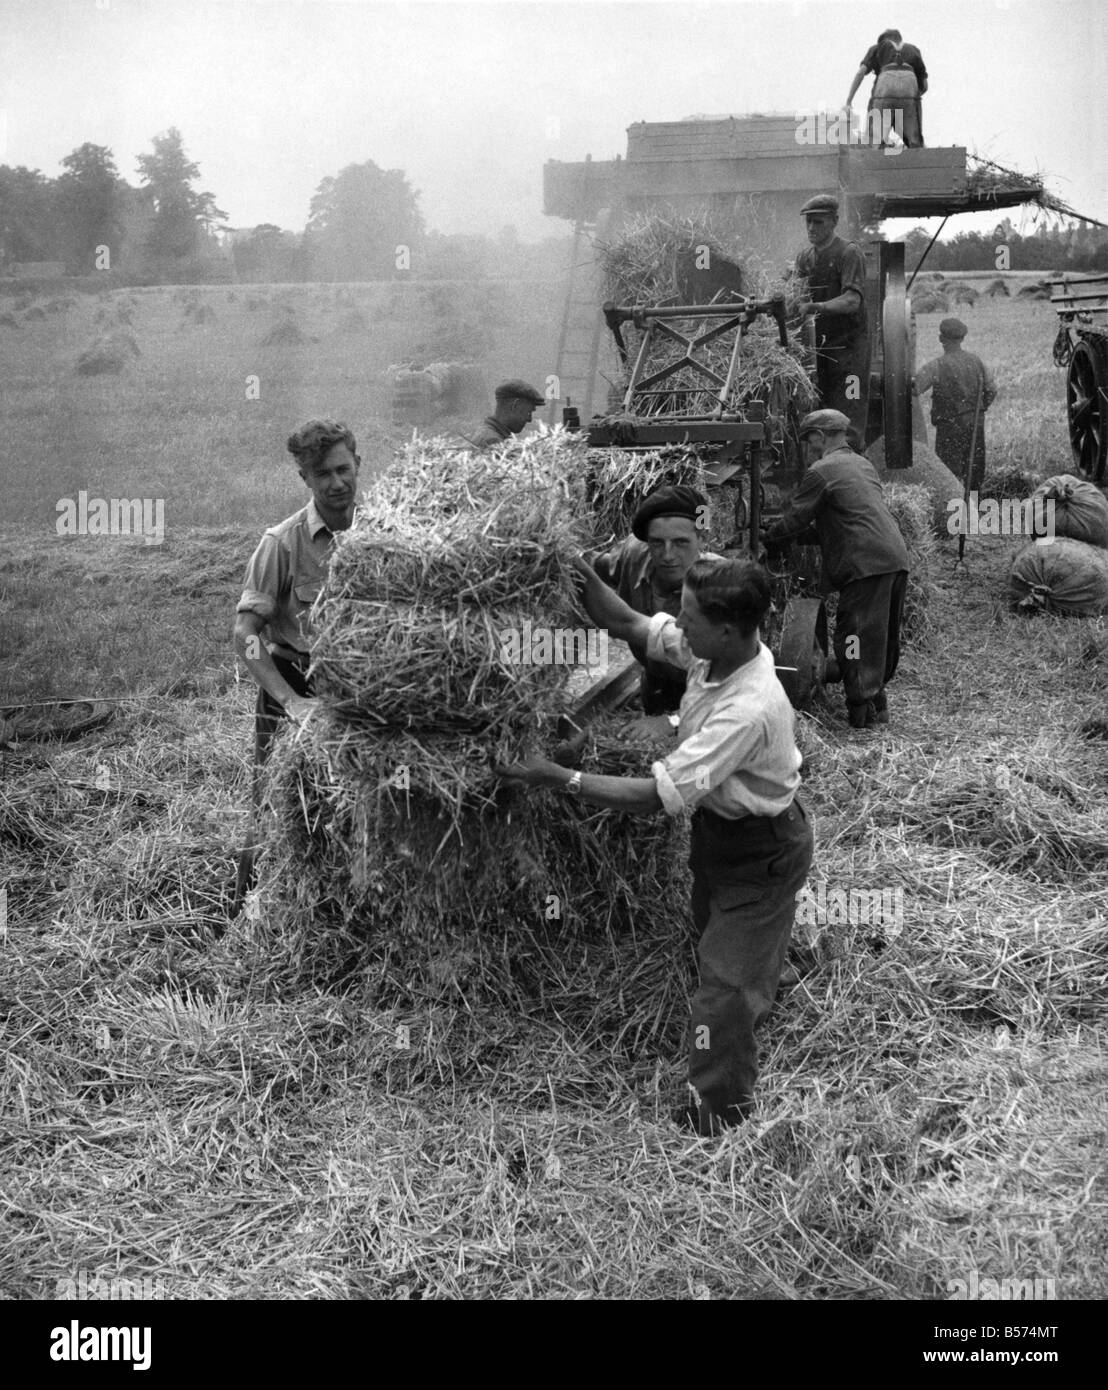 Our Daily Bread Their Daily Care. Once farm-work was spurned by the young boys who left school, and they went to the towns for work that paid more. Now they are coming back to the fields to help fill the nation's larder. John Clarke, Reginald Parson and Ronald cross toil on an Essex farm stacking the straw bales after the thrashing that provided next year's food. Tomorrow their minds will be on a new harvest. August 1947 P004515 Stock Photo